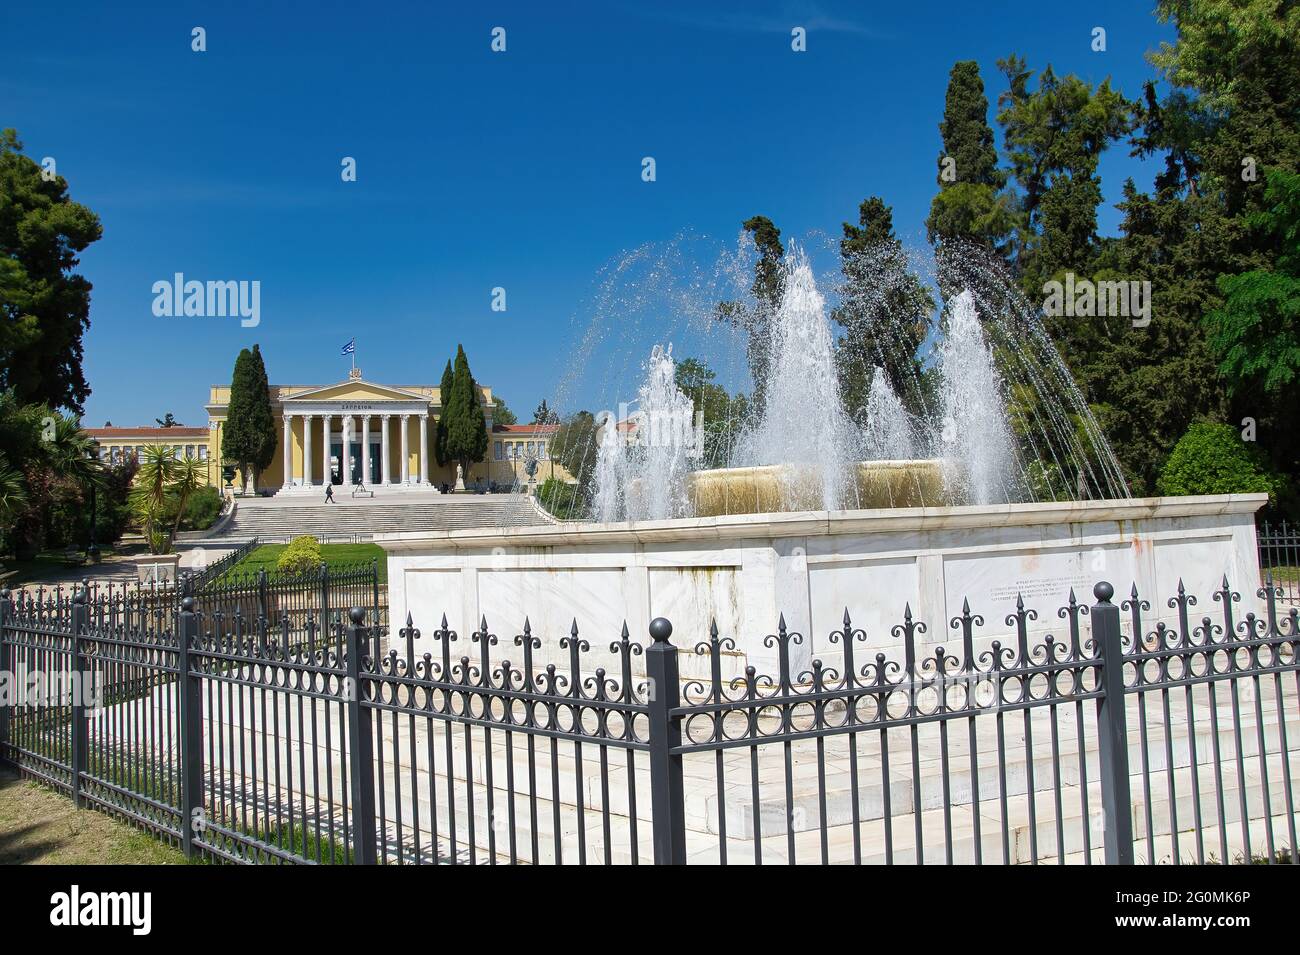 Zappeion Megaron is a part of national heritage of Greek civilization. Athens Greece, 5-20-2021 Stock Photo